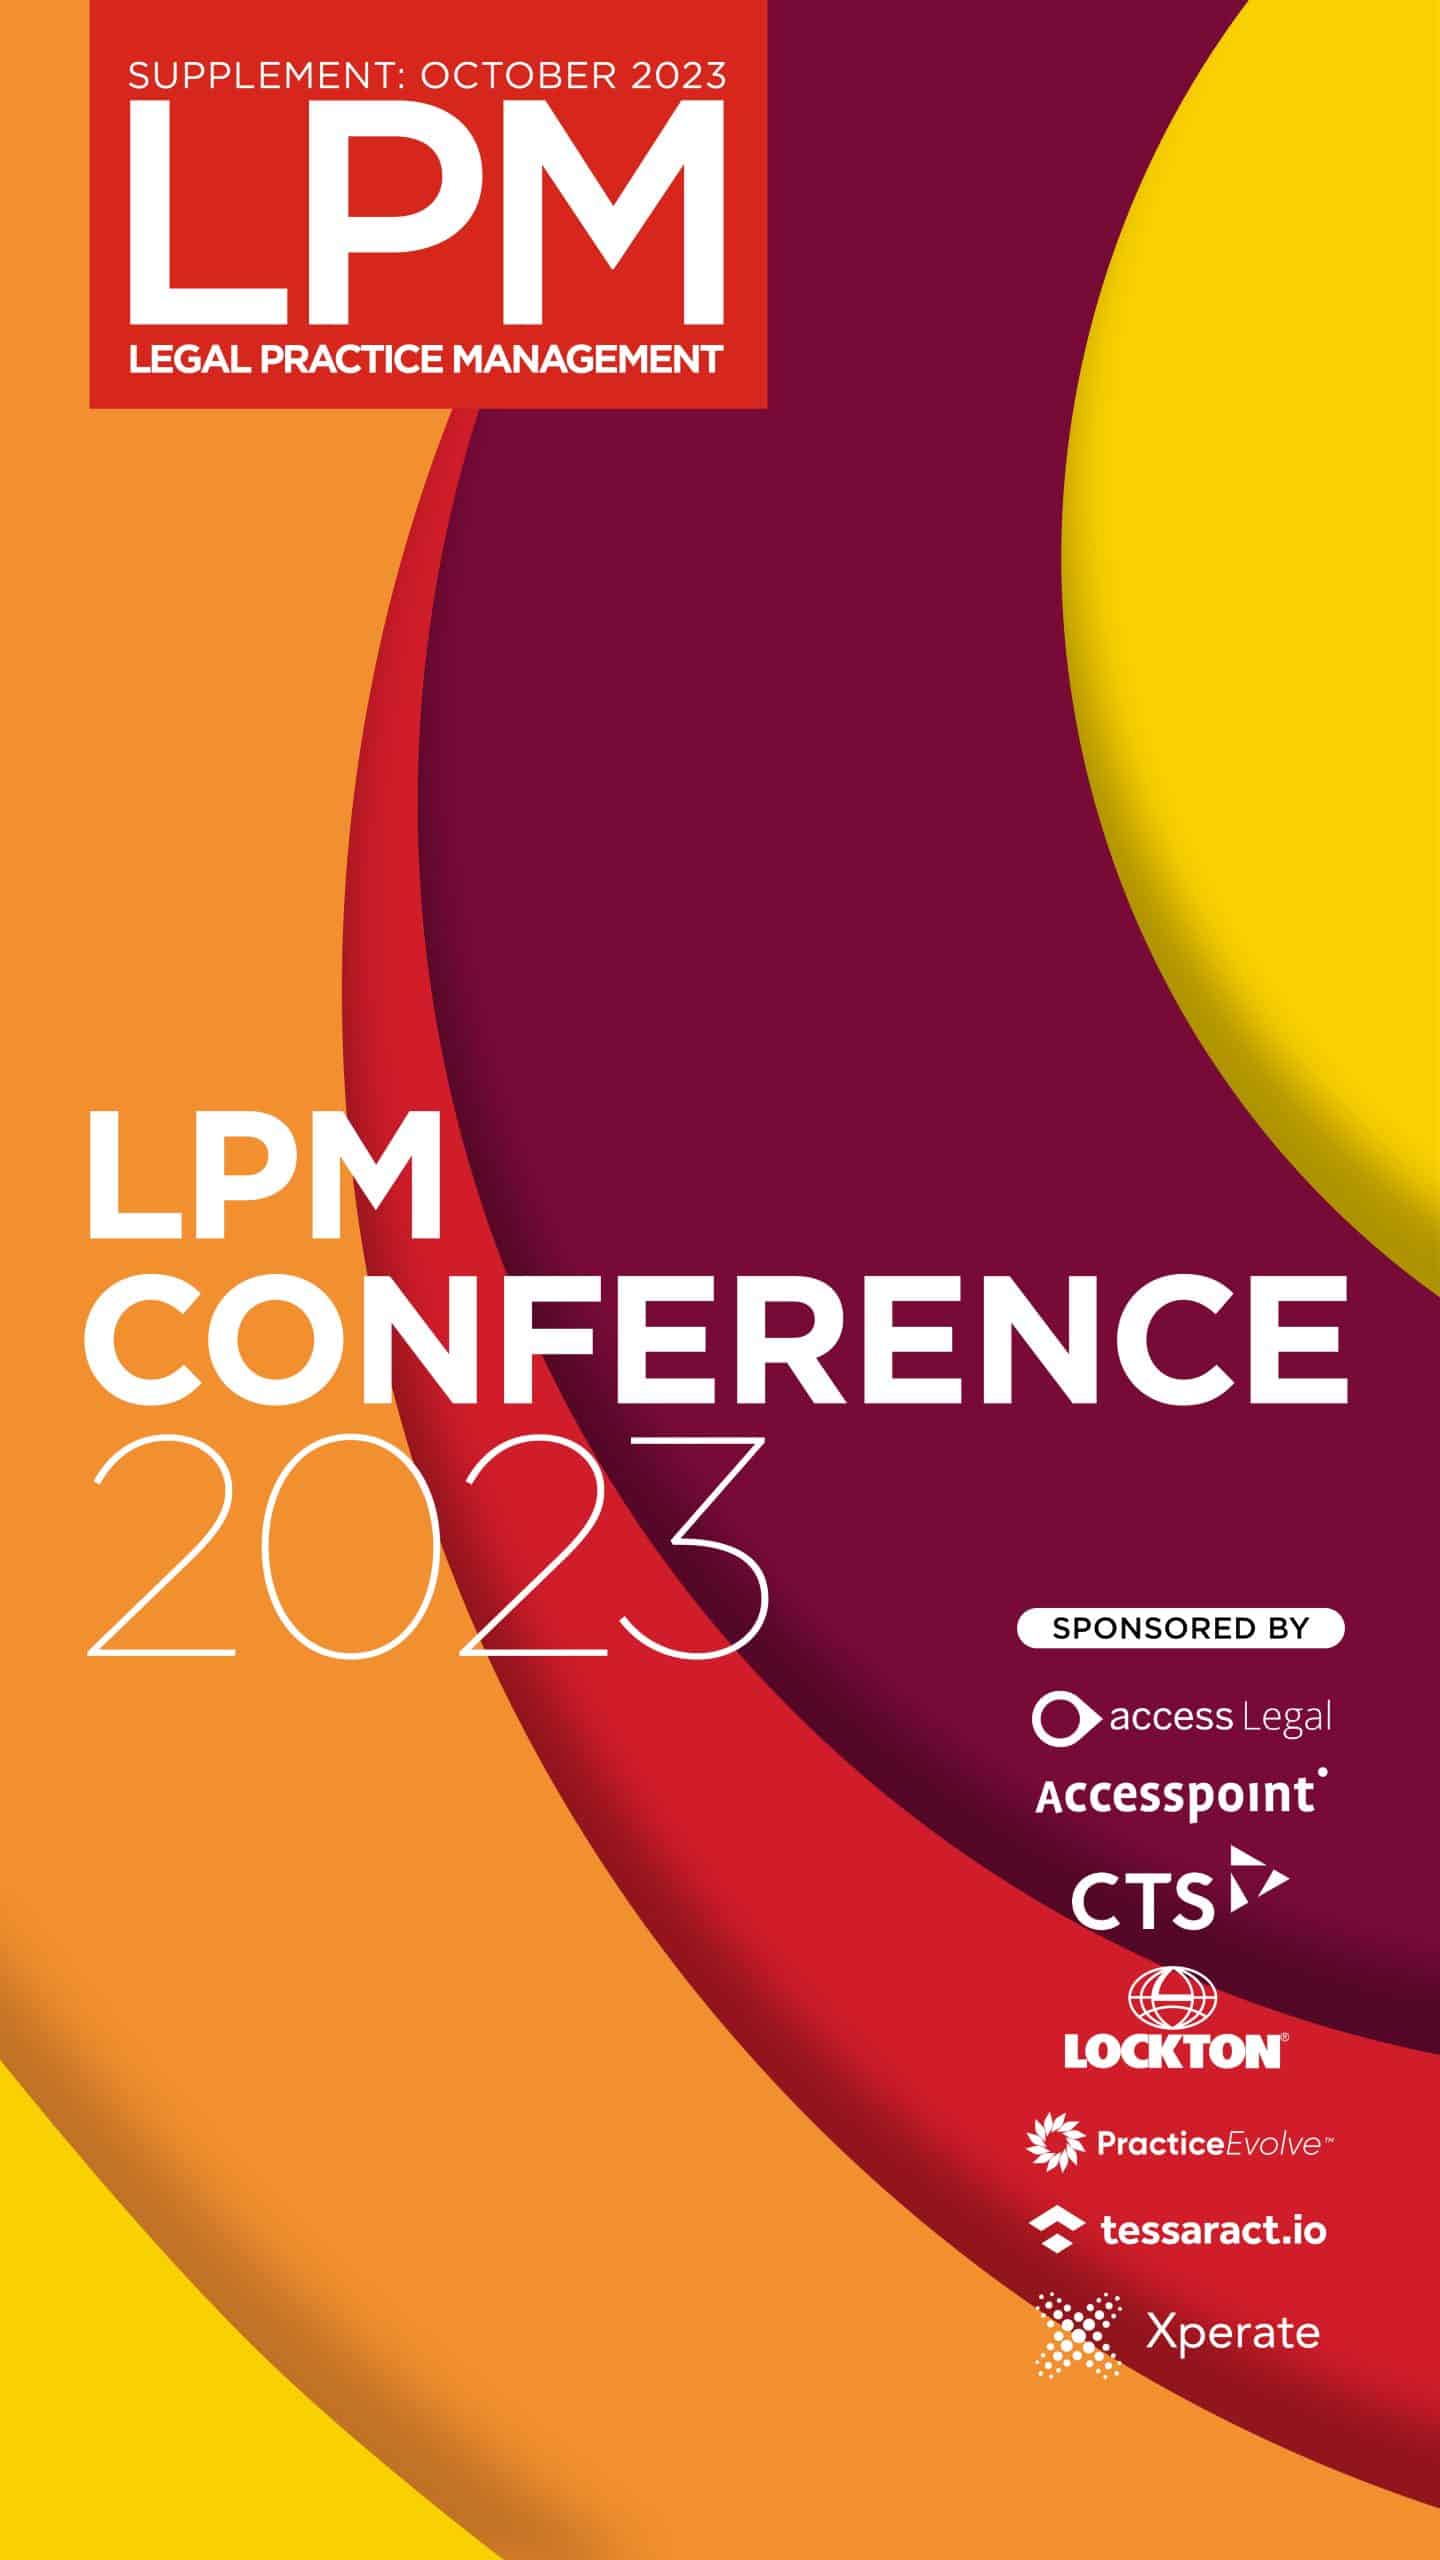 LPM Conference 2023